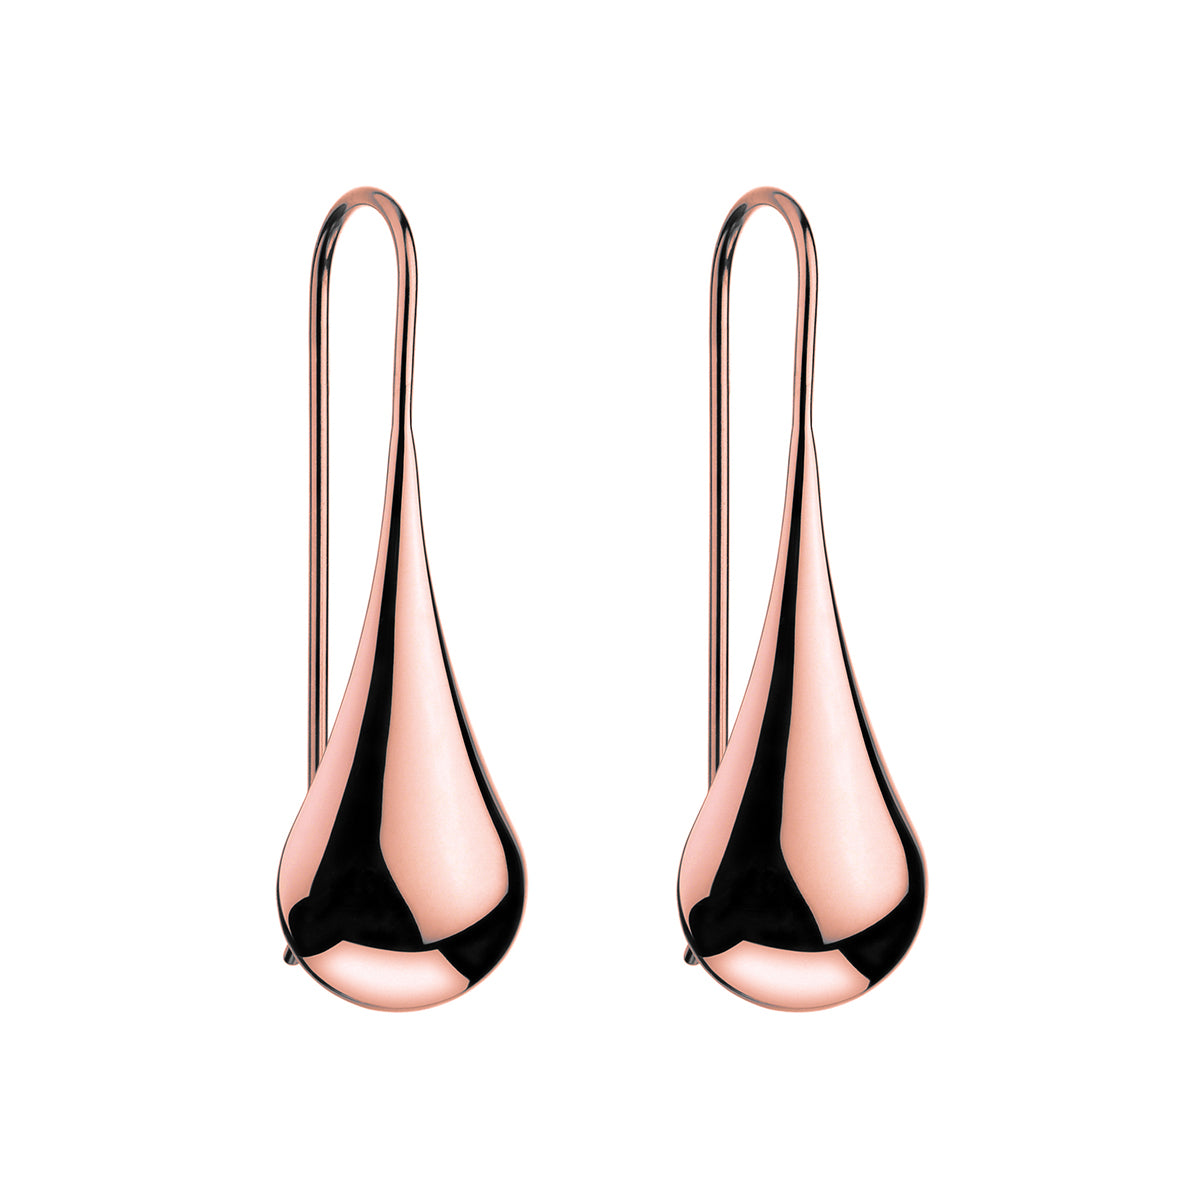 Weeping woman rose gold earring